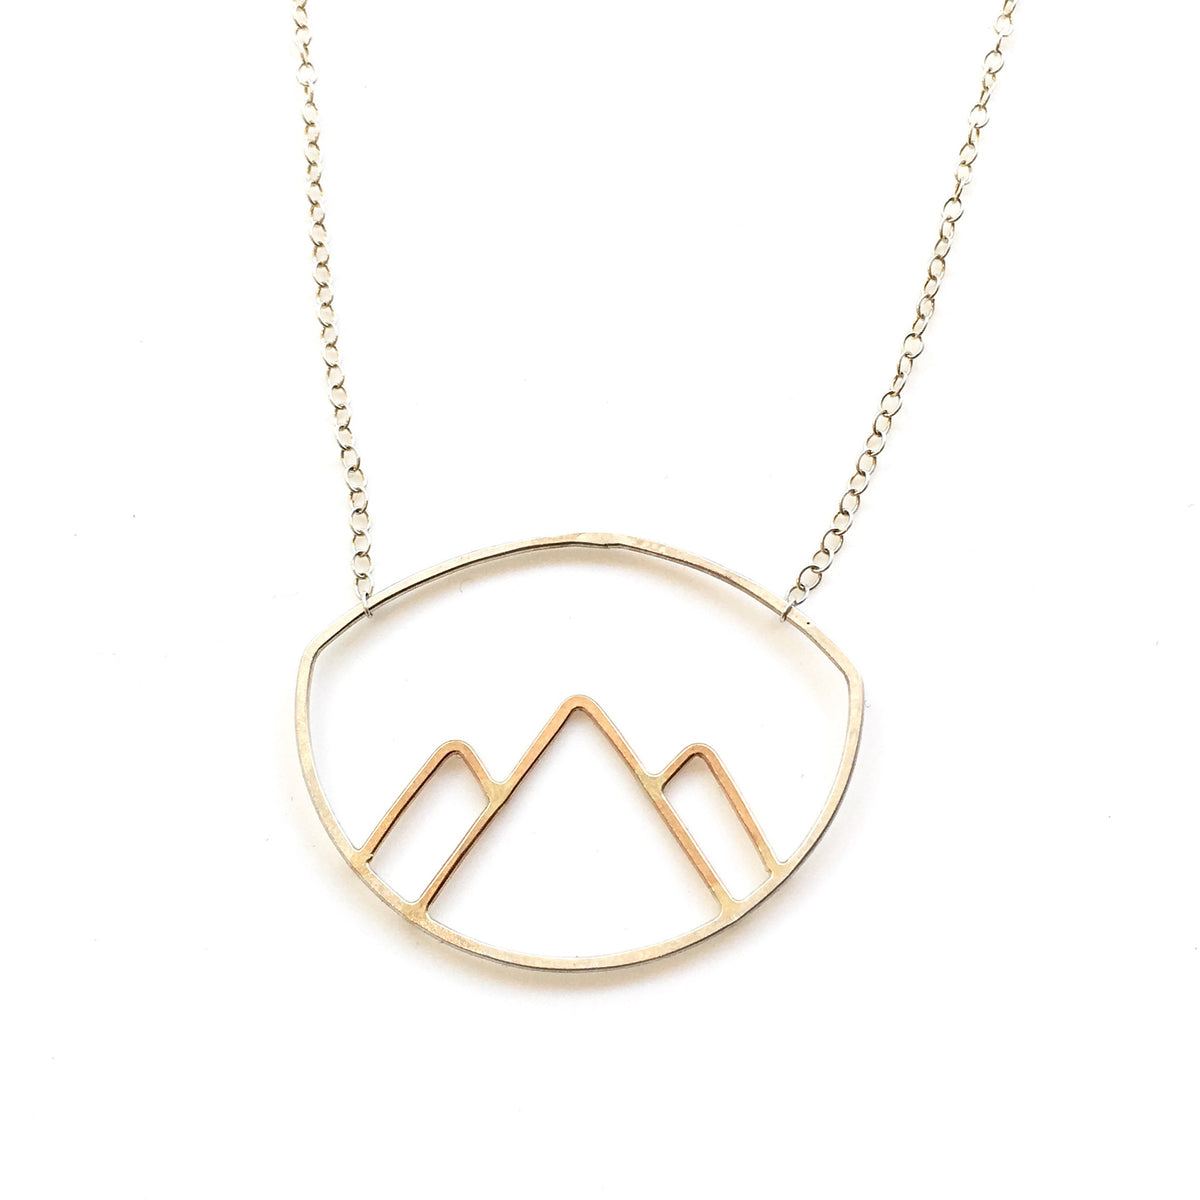 Mountain Peaks Necklace